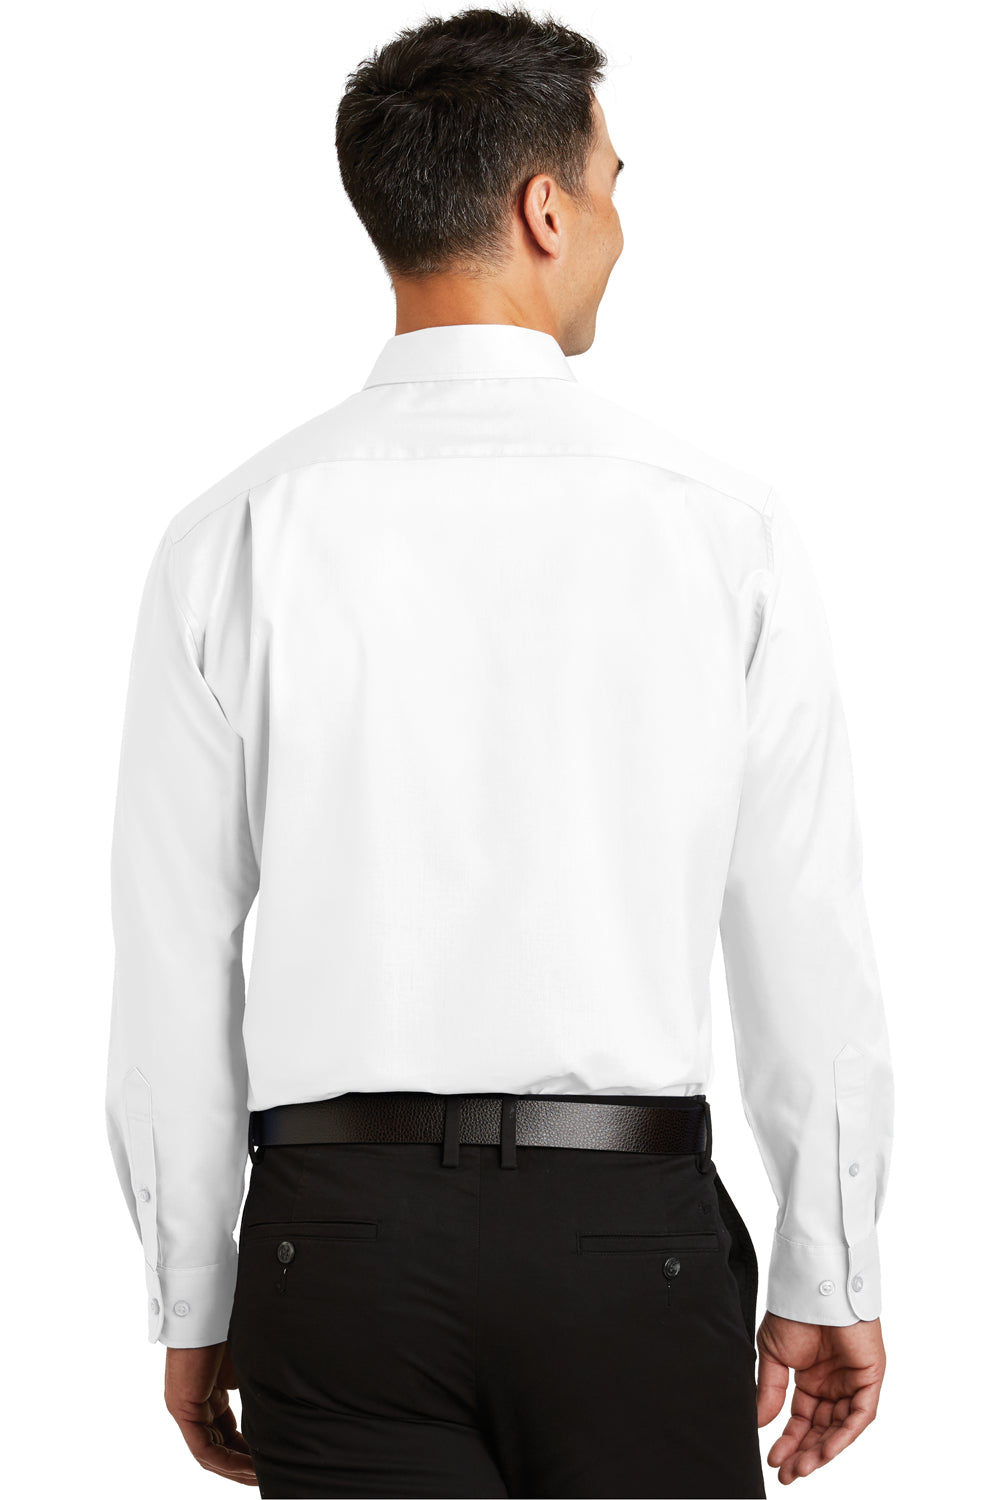 Port Authority S663 Mens SuperPro Wrinkle Resistant Long Sleeve Button Down Shirt w/ Pocket White Back